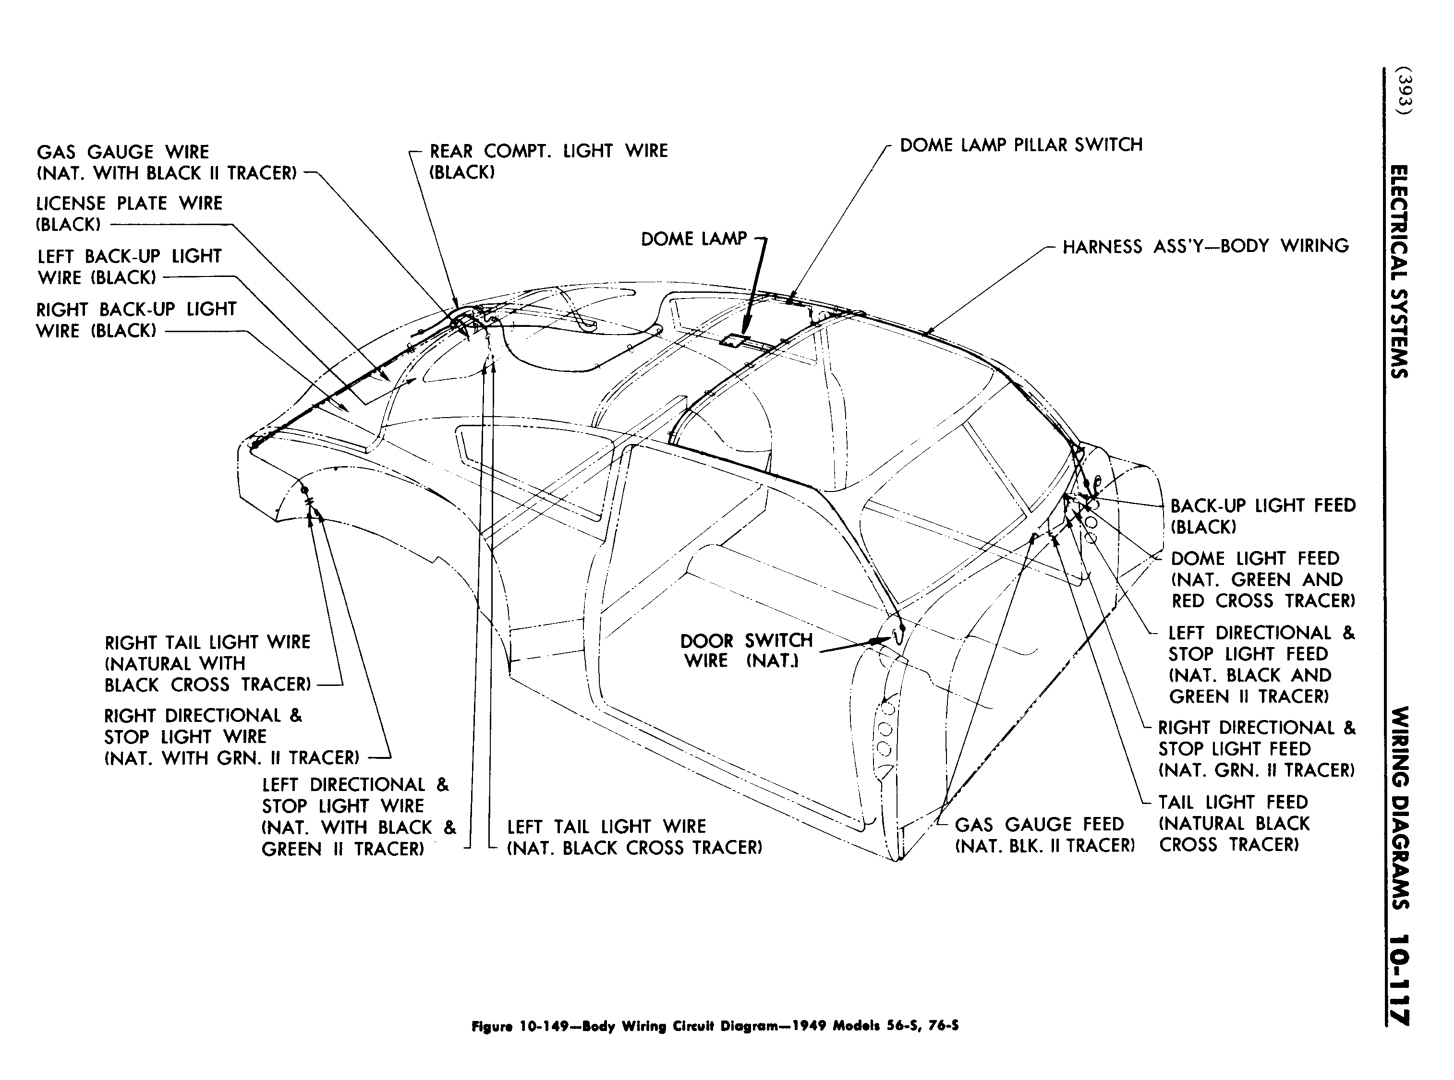 n_11 1948 Buick Shop Manual - Electrical Systems-117-117.jpg